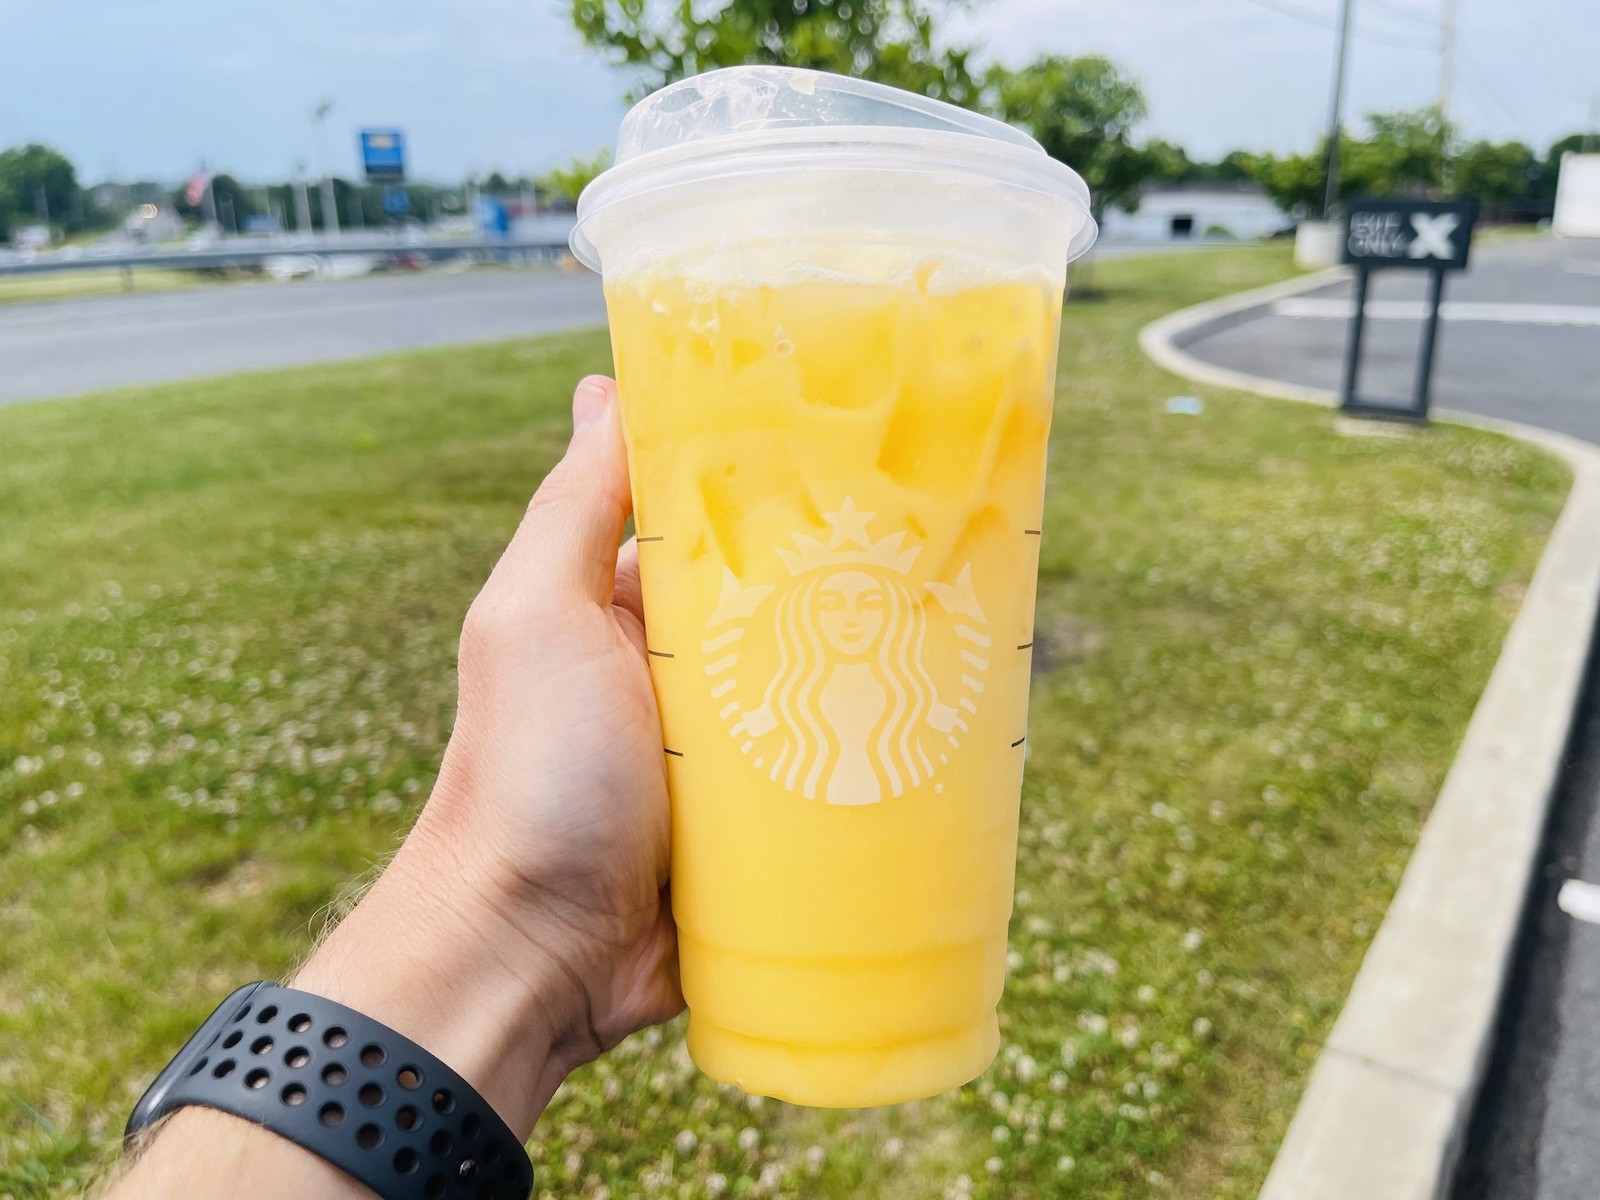 Our Starbucks Paradise Drink Review